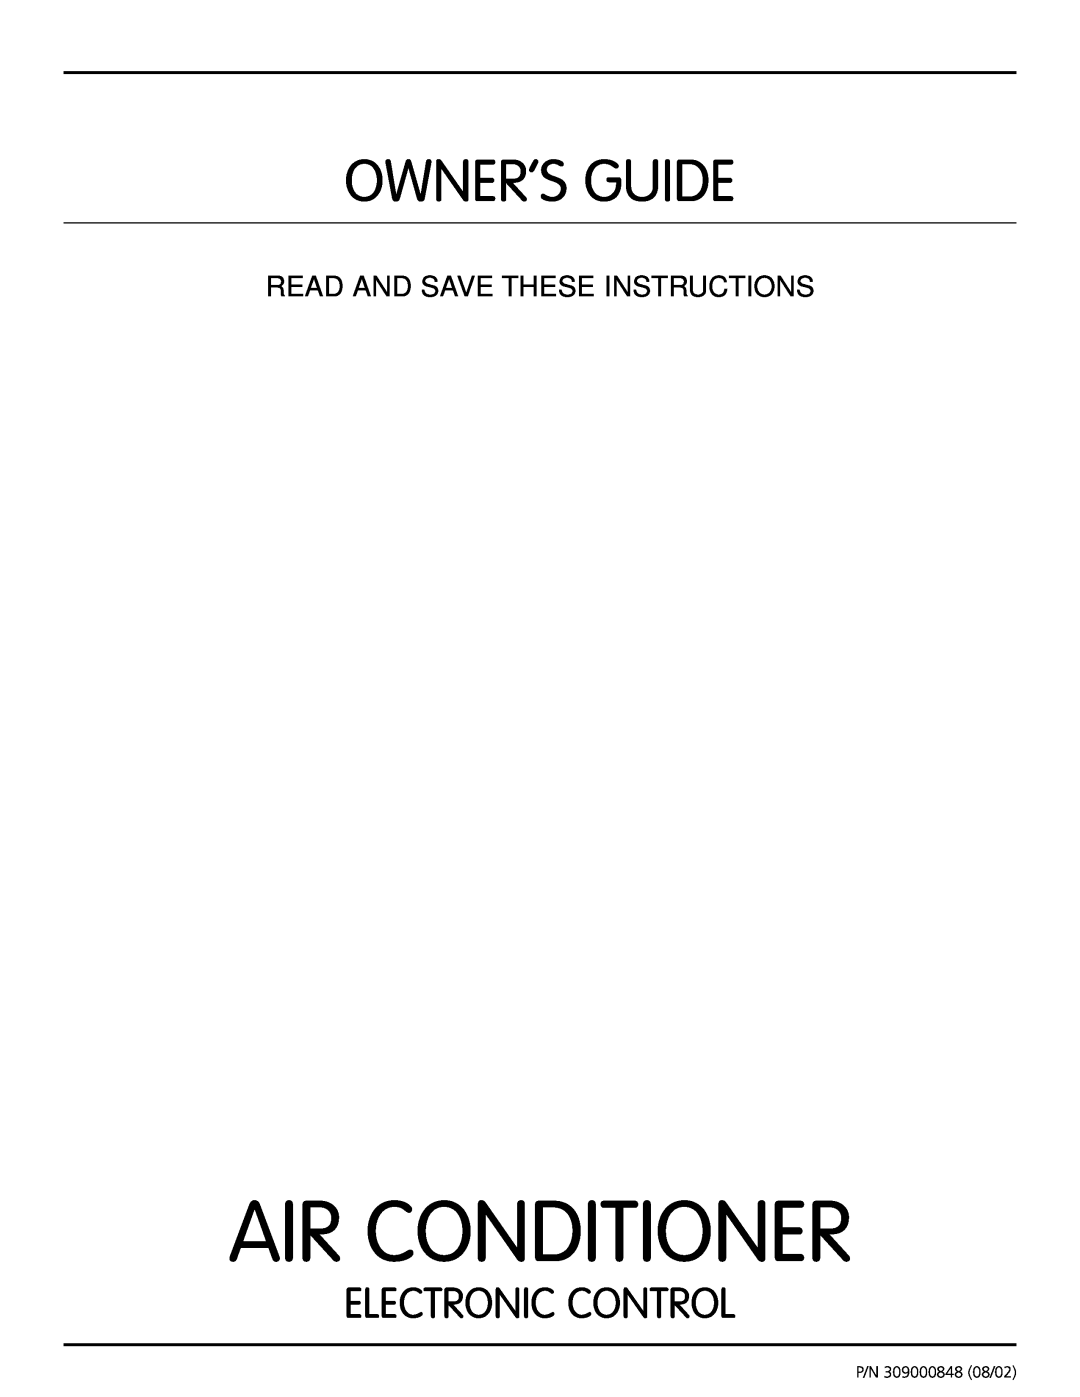 Frigidaire 309000848 manual Air Conditioner, Owner’S Guide, Electronic Control, Read And Save These Instructions 